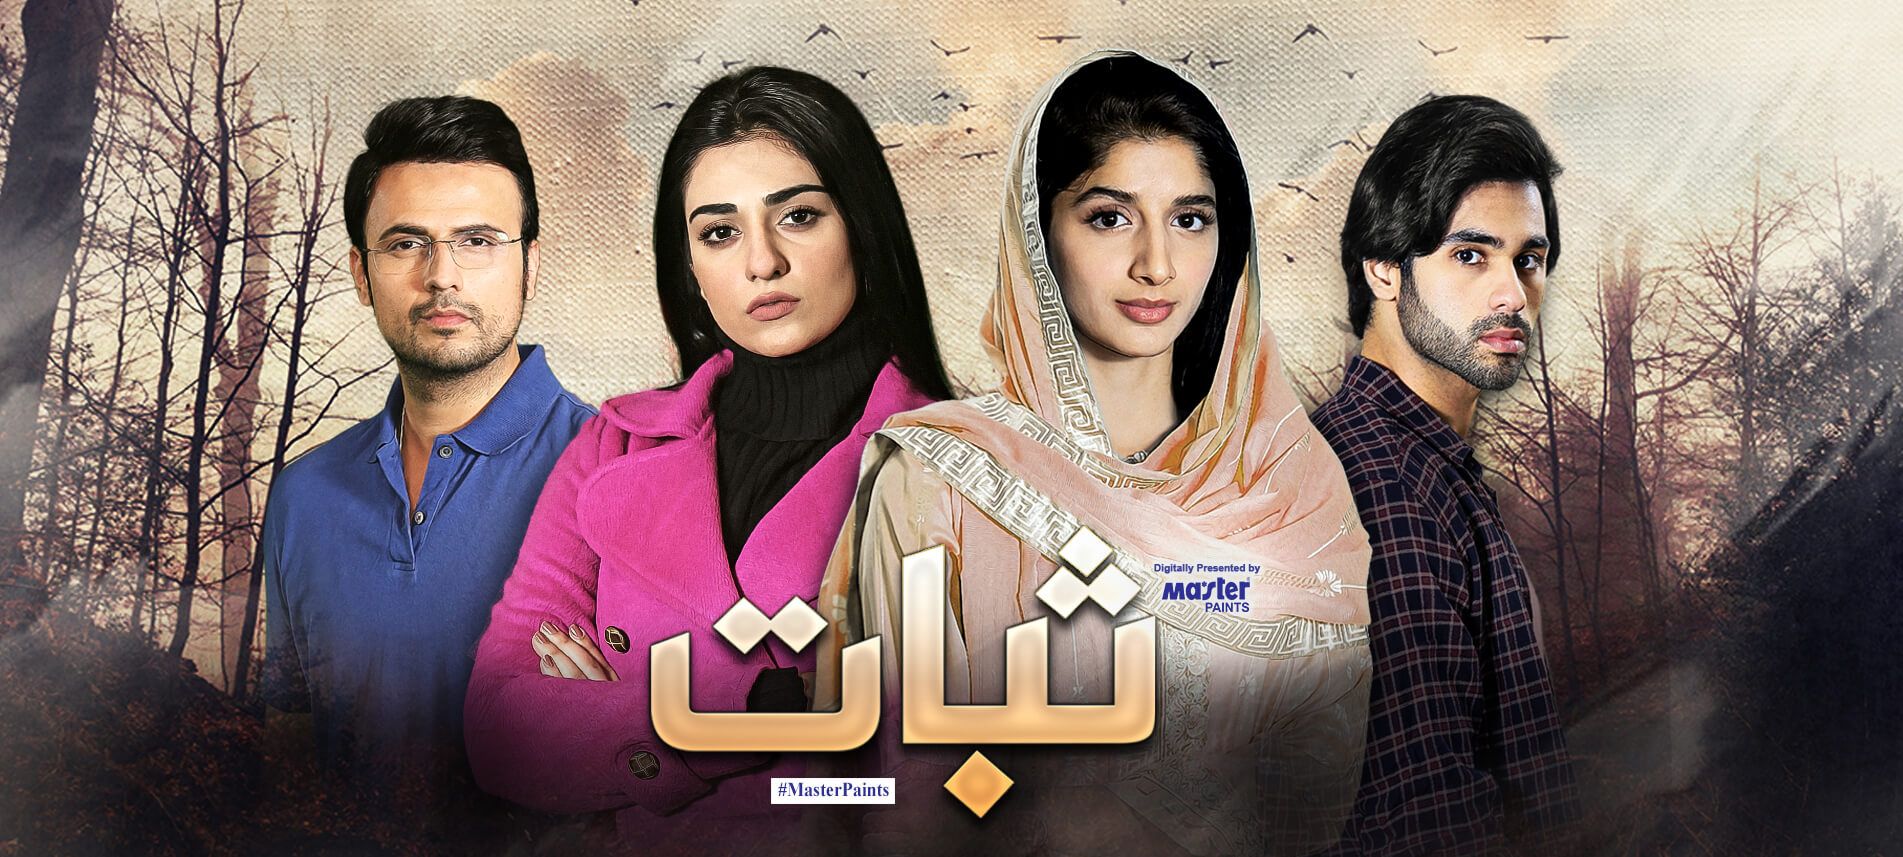 Pakistani drama industry is producing content on regular basis to entertain viewers at the best. These dramas are based on different stories related to social issues as well as domestic troubles. However, some of these dramas fail to portray the true essence of any issue discussed related to society. Most of the dramas these days are good in story-line as well as in terms of direction and acting. Here we have got the list of 10 latest best Pakistani dramas you must watch in 2020. Check out this list! Sabaat Sabaat is based on an amazing idea which is quite different from those of conventional subjects. It's story revolves around different aspects i.e. psychological, financial in terms of status, social pressures, and family life.  The lead cast of this drama serial includes Sarah Khan, Mawra Hocane, Ameer Gillani, and Usman Mukhtar. Sarah Khan as Miraal and Ameer Gillani as Hassan belong to a super rich family. Miral is quite possessive regarding wealth and status while Hassan learns by the time not to rely on materialistic approach.  Mawra as Anaya belongs to a middle class family and she is a gold medalist but social pressures make her face hurdles in married life. Hassan falls for Anaya and takes stand to marry her despite status differences but it turned out troublesome to Miraal. Usman Mukhtar is Miraal's doctor who then gets married to her as well. The story is going on and with lows and highs, twists and turns, where every episode is revealing new ends. You can watch it every Sunday at 08:00 PM only on Hum TV. Kashf Kashf revolves around the main, title character ‘Kashf’ played by Hira Mani and her struggles in life. However, her life issues are beyond the husband, saas and nand matters. It is a harsh reality of our country that is not mostly explained and remains a taboo topic to a certain extent. With Hira Mani and Junaid Khan in the lead, Kashf is an eye-opener for many. As per the story, Kashf is a gifted girl who has acquired the ability to foresee future events through her dreams. Her greedy father exploits her abilities by misusing her to overcome their financial crisis. The story revolves around how Wajdaan (Junaid Khan) helps her to get rid of the cage of society’s evil-minded people. This drama is also a must-watch as it also draws attention towards important taboos of our society and the steps taken to come out of poverty while making way through evil minds around. Kashf is on-aired on Hum TV every Tuesday at 08:00 PM. Mehar Posh Mehar Posh has something special about it and that is the real-life couple Danish and Ayeza starred together in the drama. The story of Mehar Posh is the story of Mehru’s (Ayeza Khan) life being terribly disturbed just because of Shah Jahan (Danish Taimoor). The beginning of this drama showed Shah Jahan a very helpful individual and is always running around doing chores for Mehru’s family. Mehru is an independent working woman who is going to get married soon and arrangements are being made for the big celebration. Her marriage ends up in divorce on the first night due to Shah Jahan’s friends teasing him about his love for Mehru. Mehru’s fiance Naeem (Ali Abbas) hears the boys talking and thinks that his wife having a serious affair with her lover Shah Jahan. This leads to unfortunate ending of the marriage on the first night of their Nikah (marriage). This drama following romantic story plot is a full of twists and turns with Mehru going through different trials. You can watch Mehar Posh every Friday on 08:00 PM at Geo TV. Tarap Tarap is a story of love, sacrifice, hardships and twists caused by misunderstanding at different stages. The lead cast of the drama serial includes Hiba Qadir and Syed Jibran with supporting cast Babar Ali, Nausheen Shah.  Hiba Qadir is playing the character of a girl who is mistakenly blamed for having bad character and had to go through hardships. Syed Jibran gets her married with a widower having three children and he is a cruel husband. The name of this drama serial truly depicts the subject and actors have performed well to convey the theme well. You can watch Tarap every Sunday at 09:00 PM only on Hum TV.  Mohabbat Tujhe Alvida The storyline of Mohabbat Tujhe Alvida revolves around a charming couple from a middle-class family. Sonya Hussyn played the protagonist who has a mental disorder that affects a person's reference to reality. The main cast of this drama serial is Zahid Ahmed, Sonya Hussain & Mansha Pasha play the lead in Mohabbat Tujhe Alvida. The adaptable Zahid Ahmed and the brilliant Sonya Hussain & Mansha Pasha are gracing the screens with perfection in drama serial Mohabbat Tujhe Alvida. Sonya Hussyn (Ulfat) and Zahid Ahmed acted a married couple insanely in love with each other. Ulfat played the role of a girl who dreams of becoming rich. Meanwhile, Mansha Pasha plays the role of a rich, glamorous girl who wants to be with Zahid's character. As Zahid Ahmed slowly grows in affections for his second wife, Ulfat (Sonya Hussyn) realizes that she is losing her real wealth. Mohabbat Tujhe Alvida goes on-air every Wednesday at 08:00 PM on Hum TV.